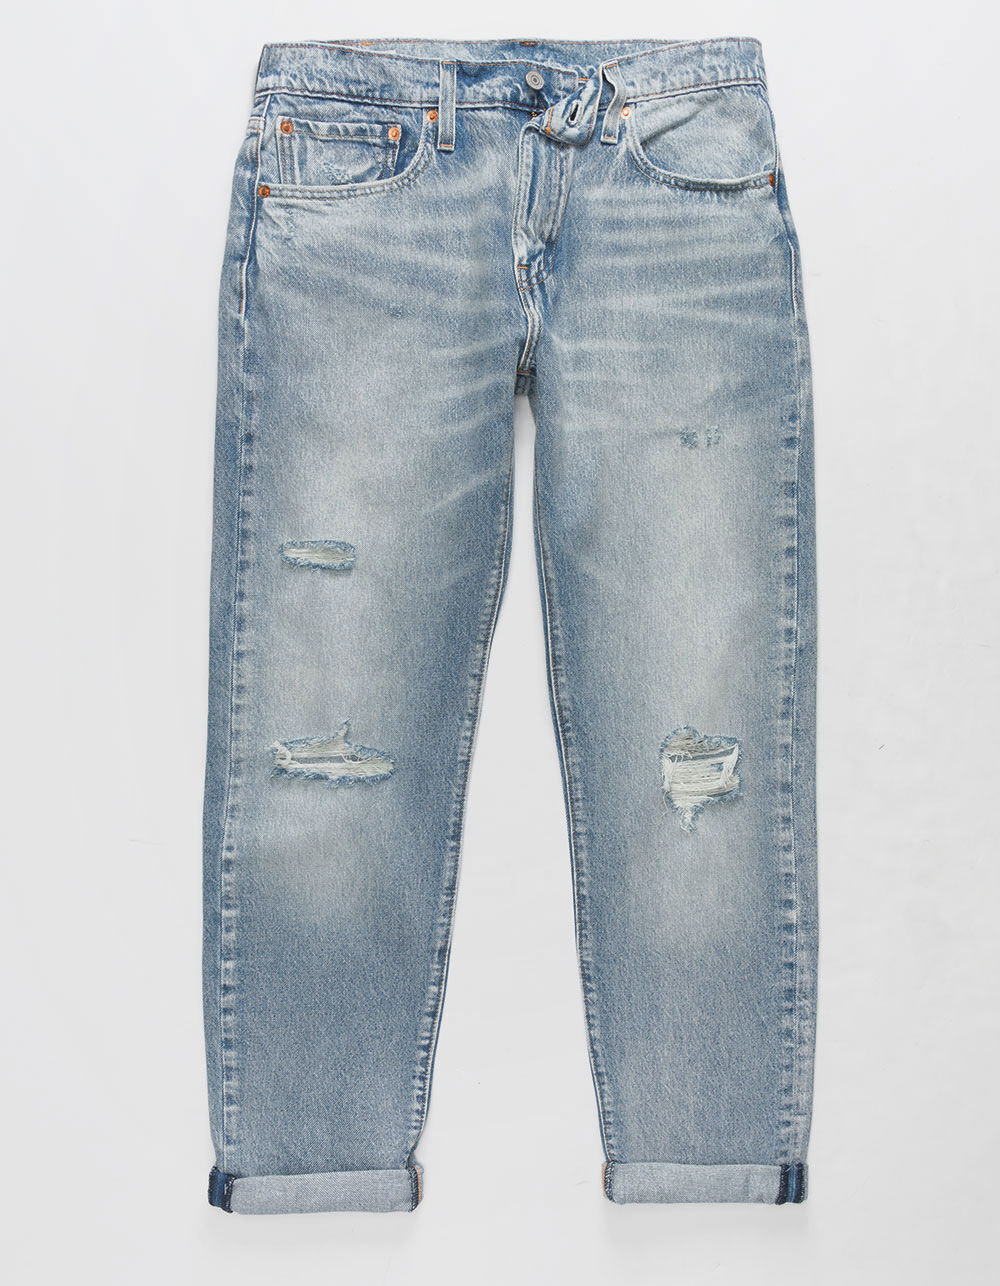 LEVI'S Hi-ball Roll Swing Man Mens Jeans image number 3